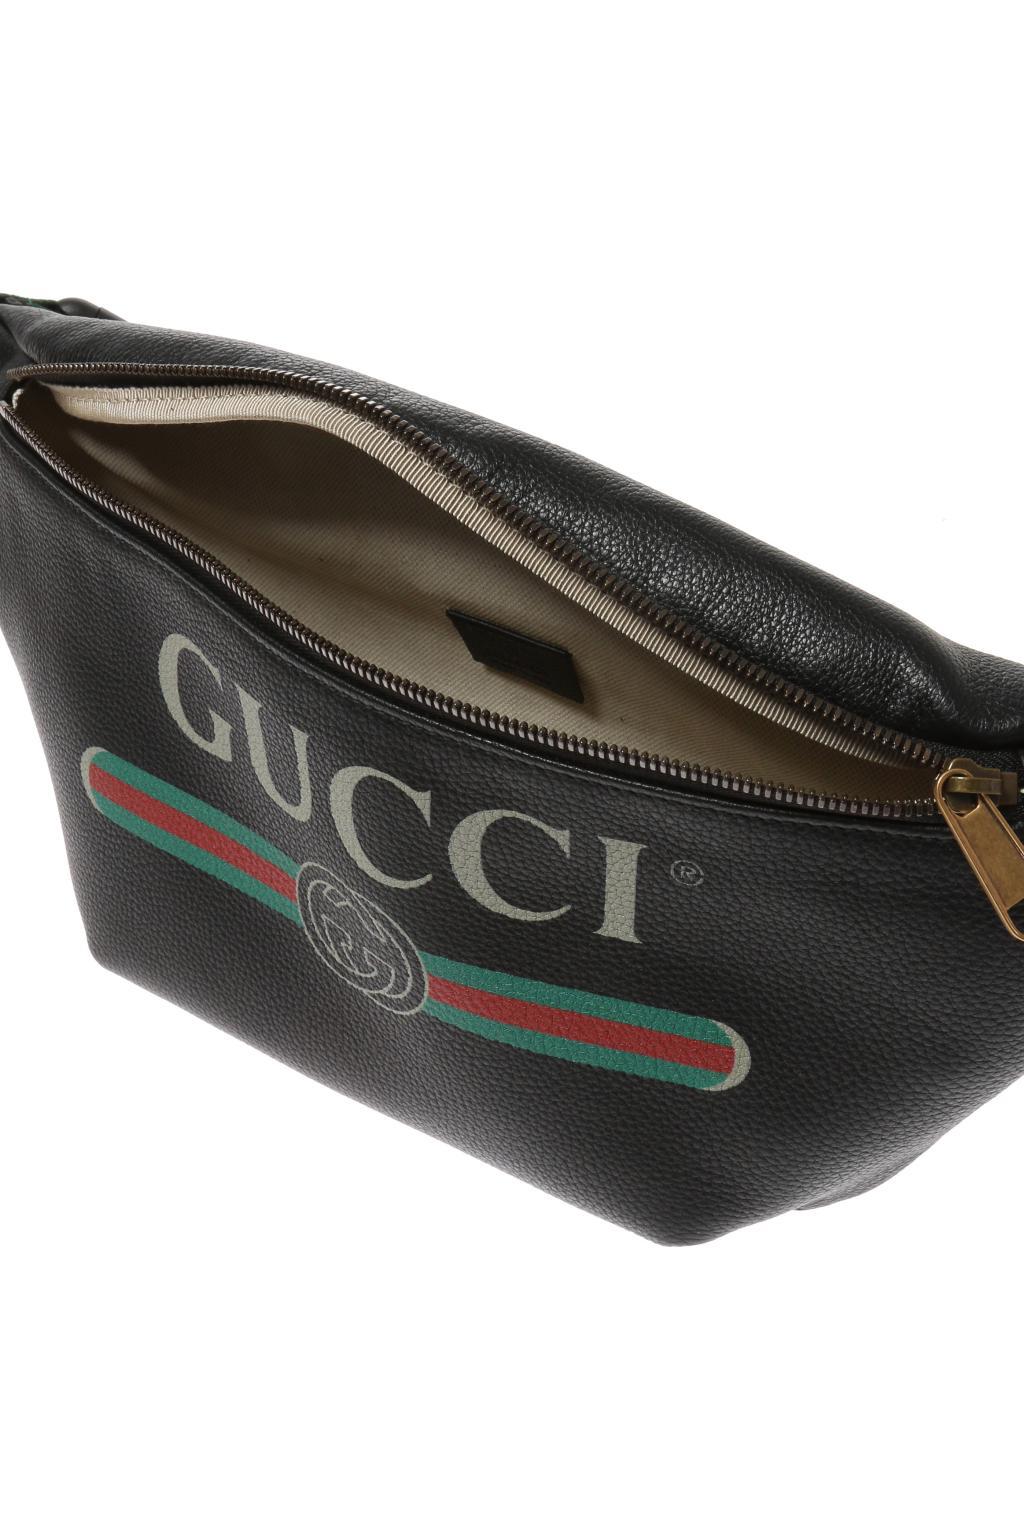 Gucci Mens Leather Cross Body Bag | IUCN Water